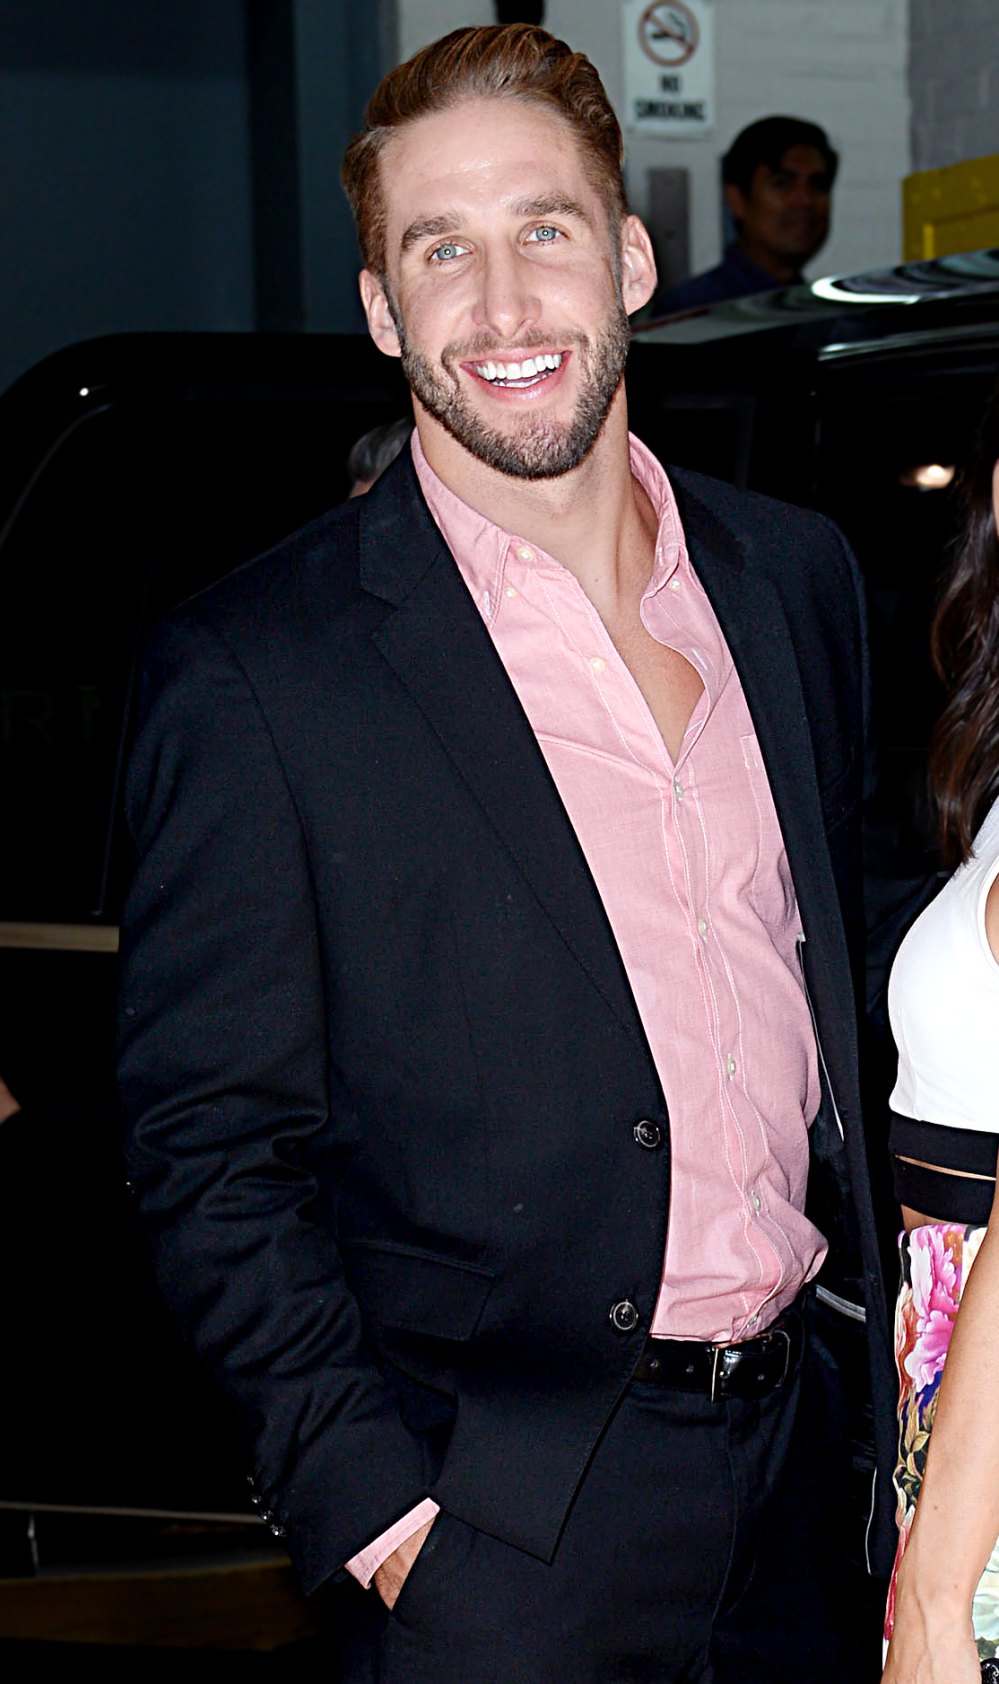 Bachelorette's Shawn Booth Announces He's Going to Be a Dad